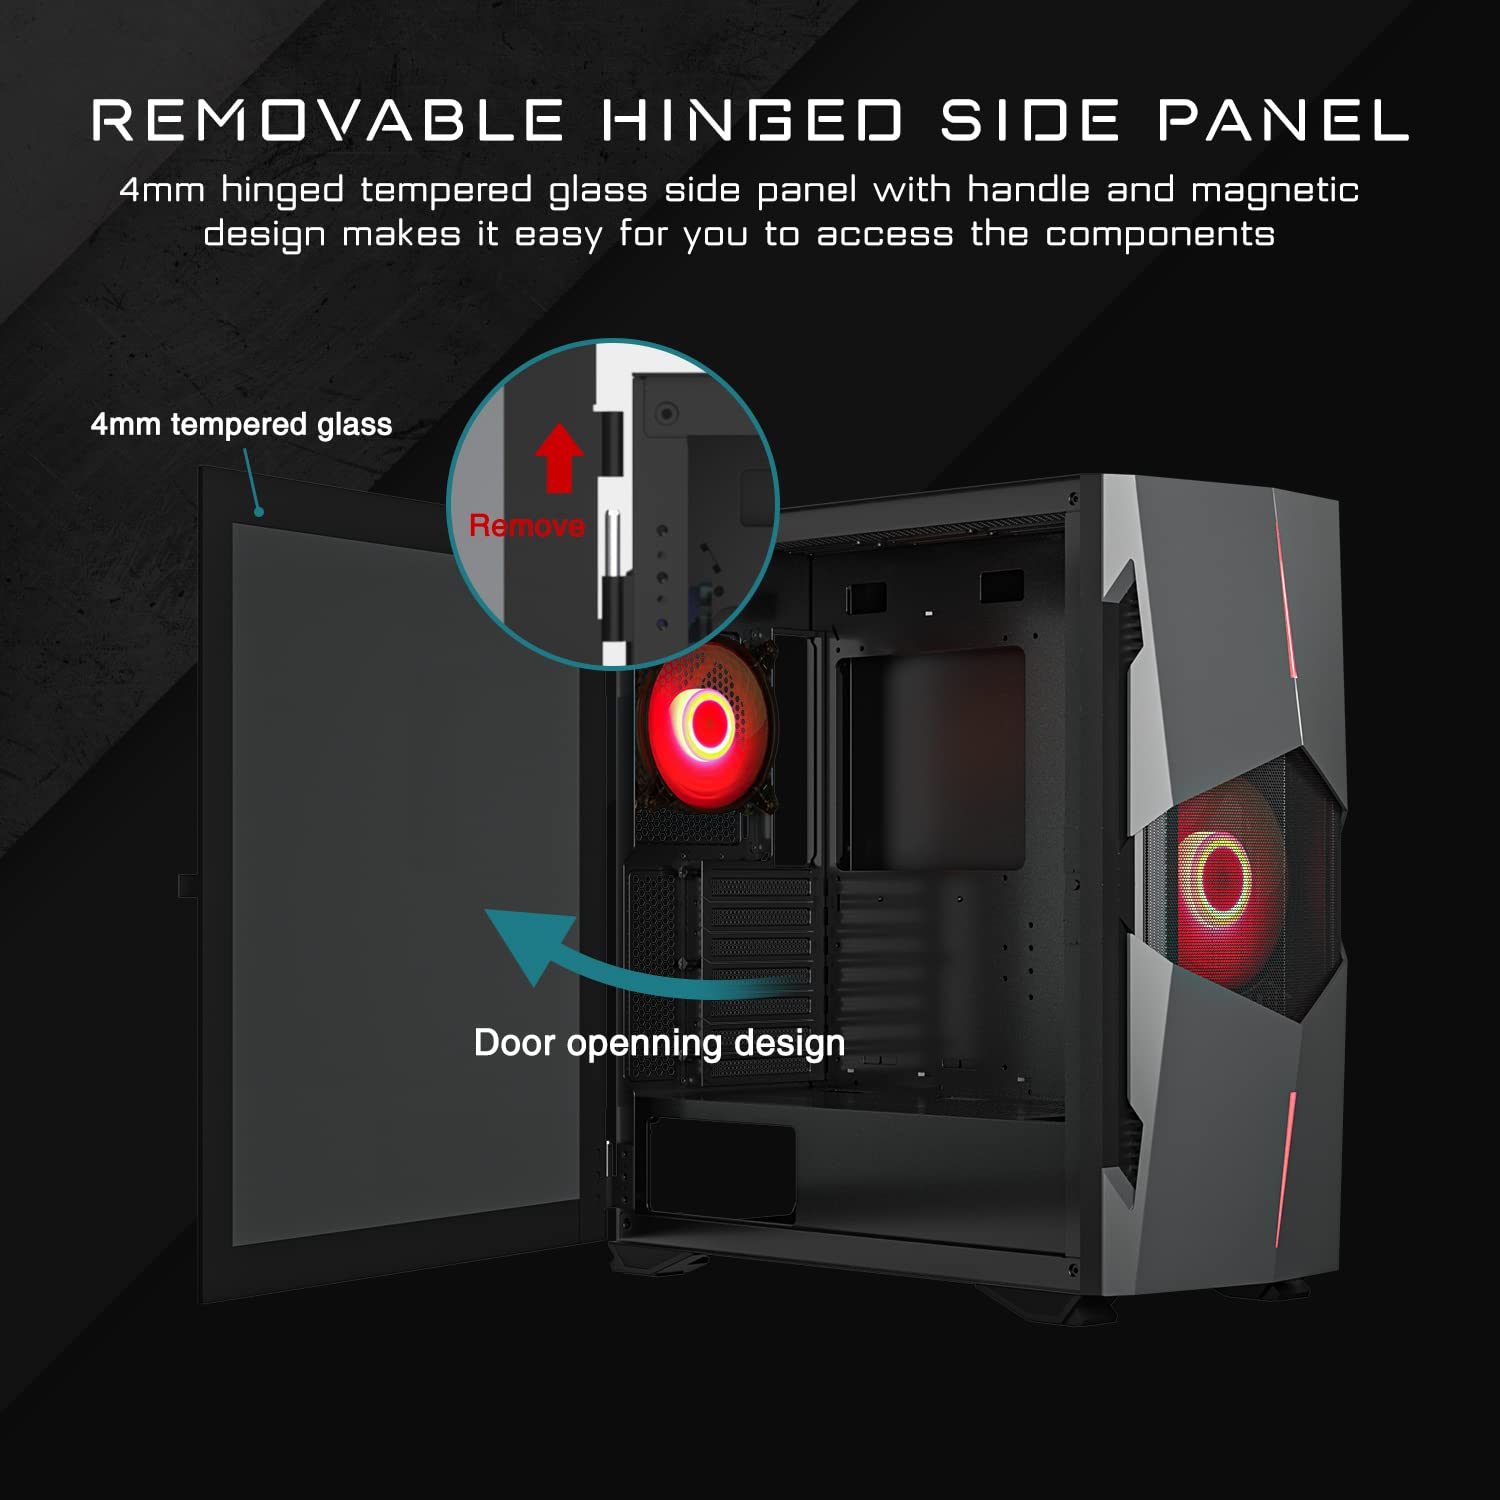 Mid-Tower Gaming PC Case, DARKROCK Space ATX Case Support Top 360mm Radiator, Pre-Installed Front 140mm ARGB Fan & Lighting Bar Rear 120mm ARGB Fan, Controller Hub LED Control Button Included